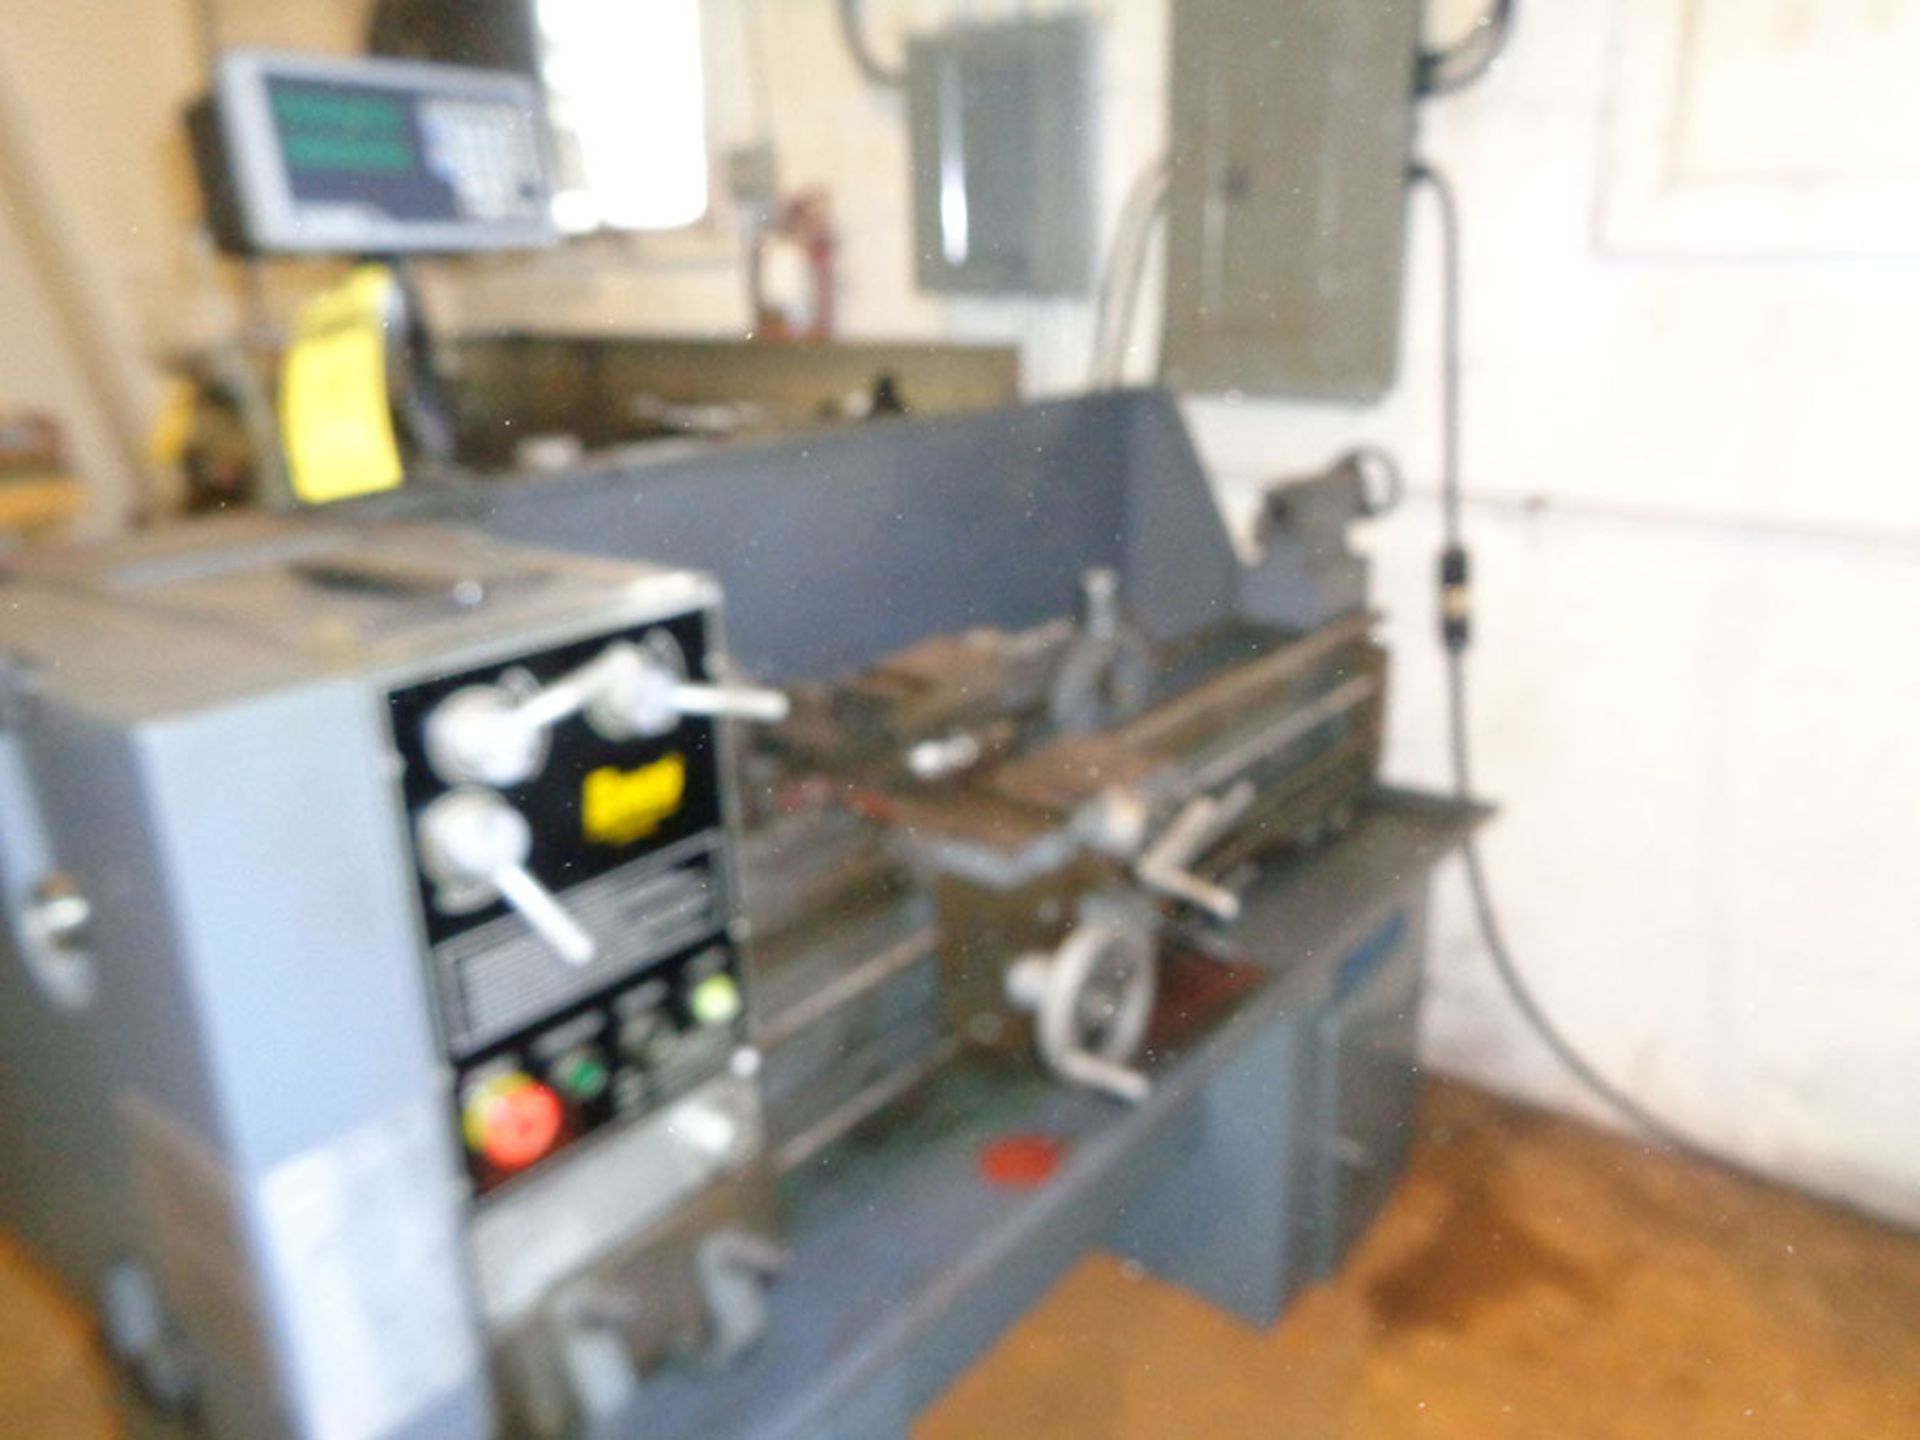 2007 ENCO 13'' X 40'' LATHE; MODEL 510-2585, S/N 67838 WITH ACU-RITE READ OUT - Image 2 of 2